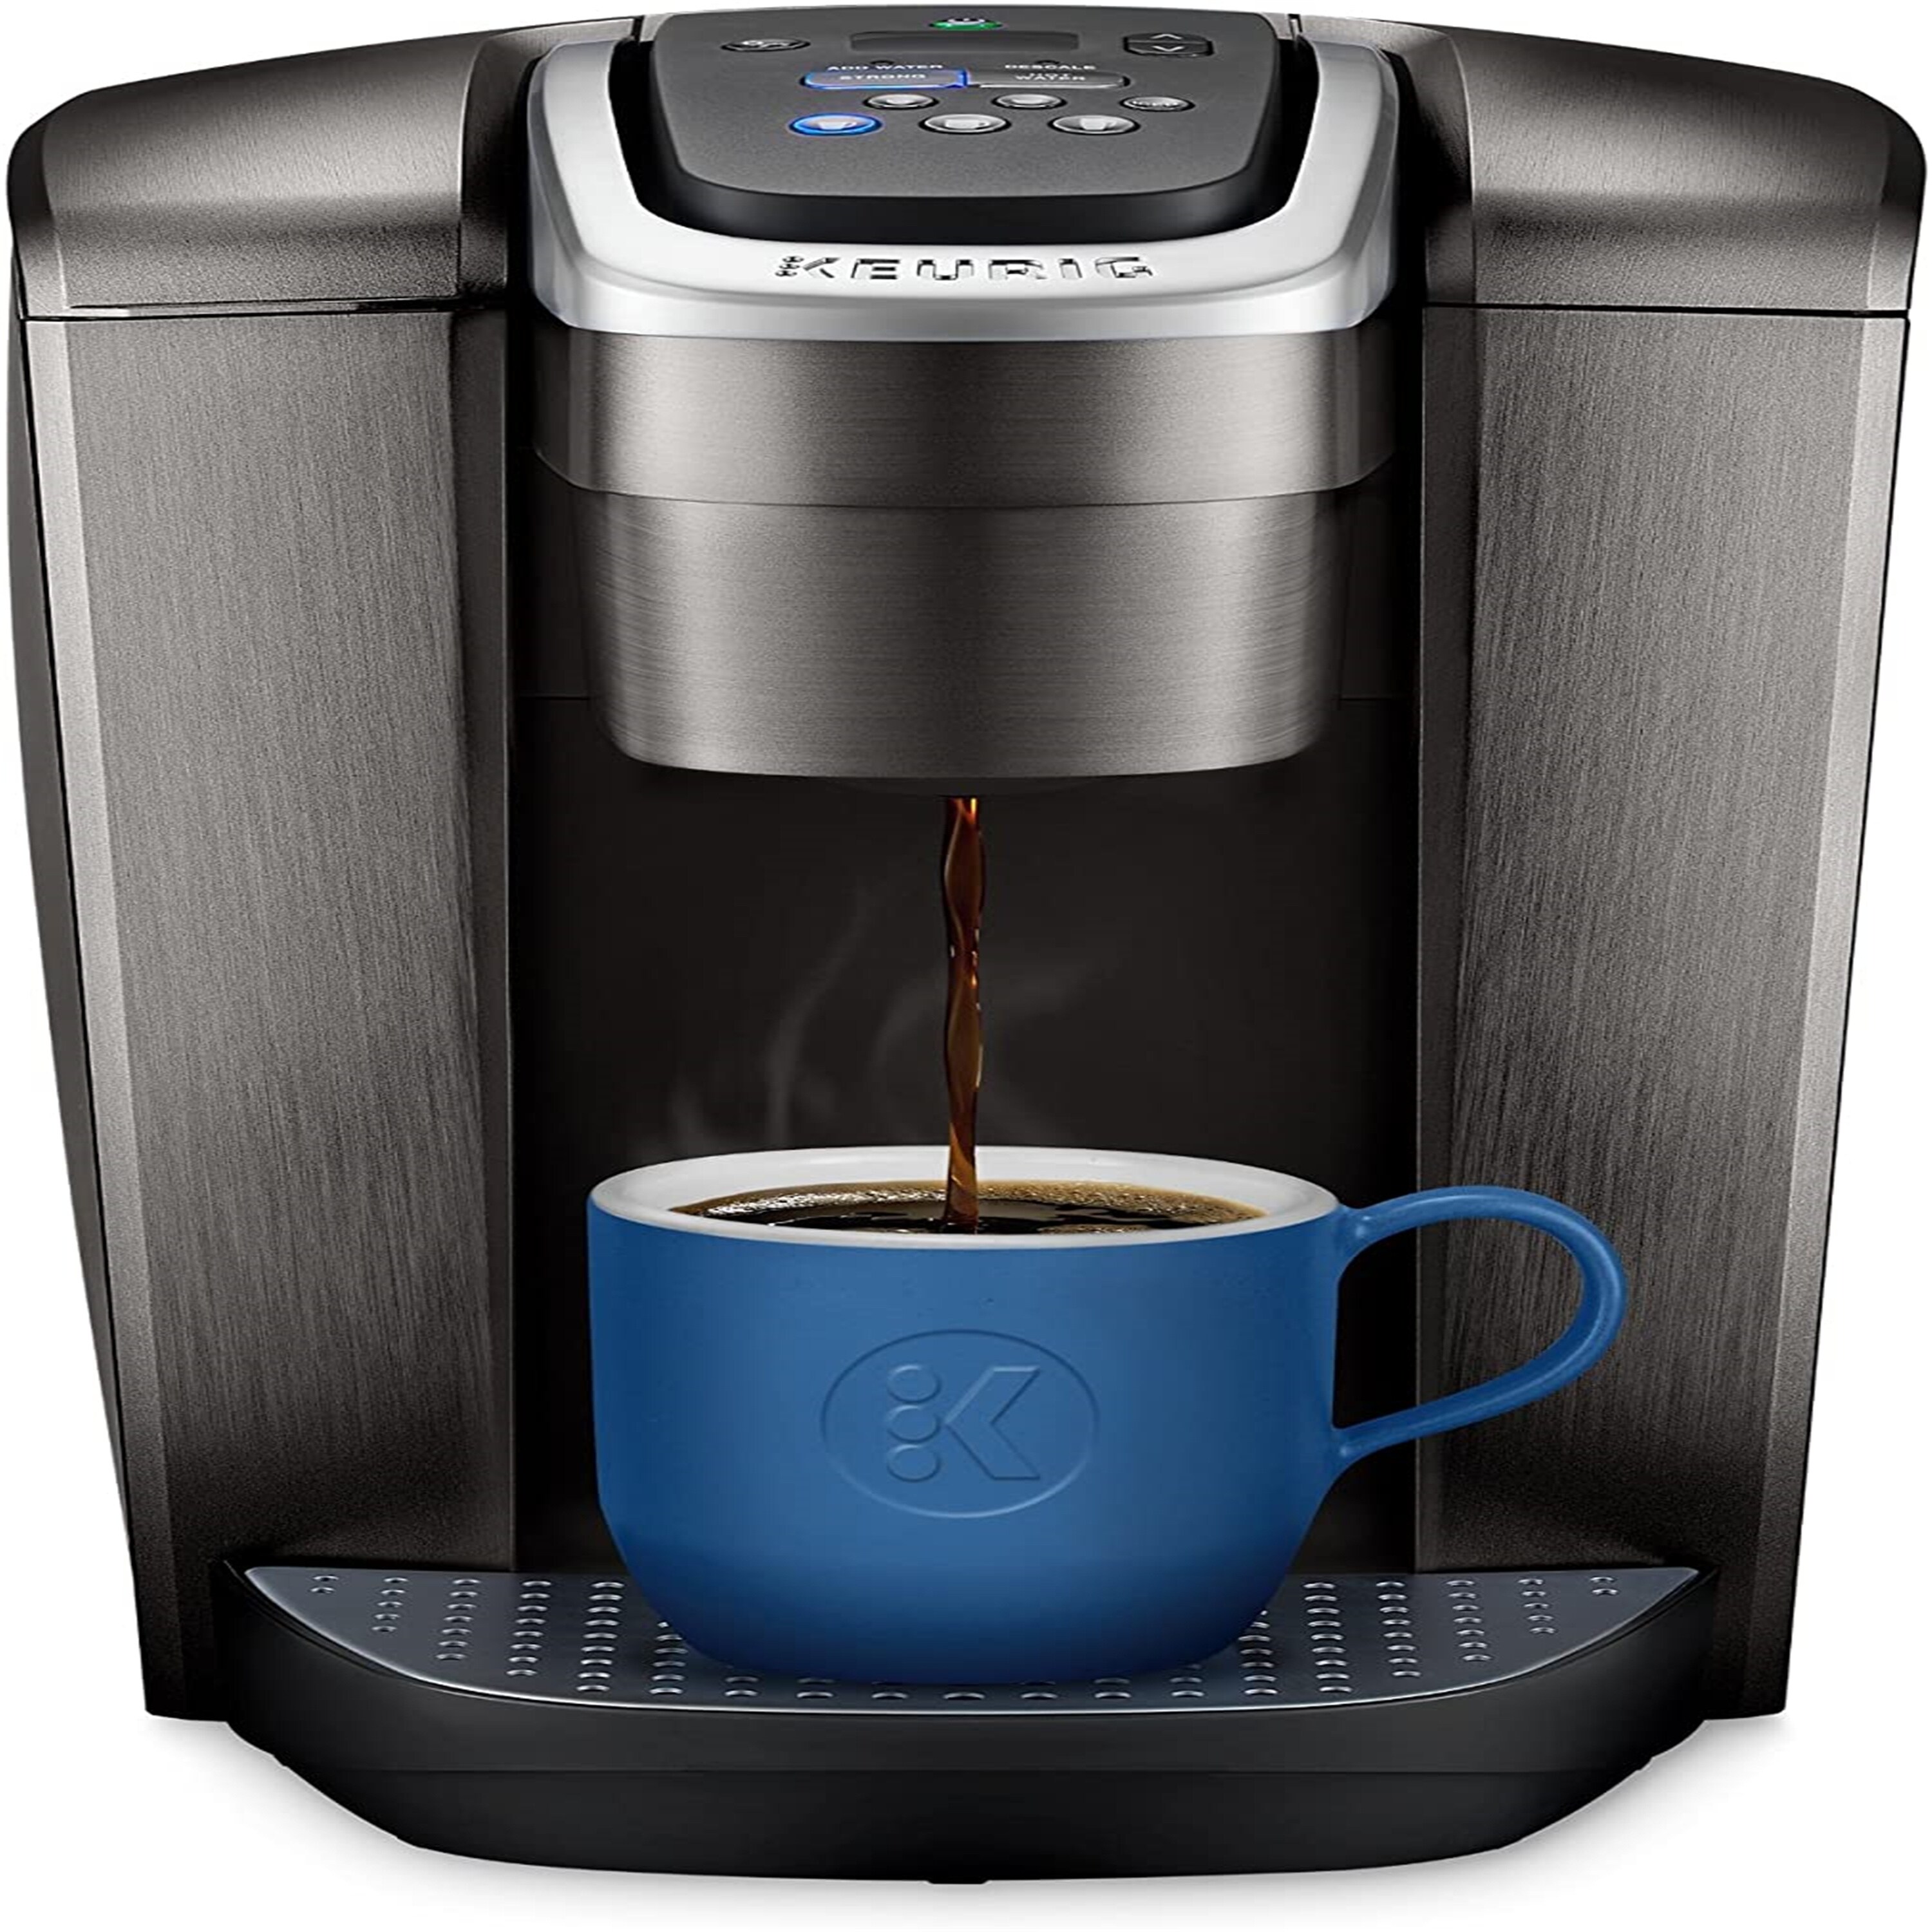 https://ak1.ostkcdn.com/images/products/is/images/direct/b4ce897f361ab150a5c2451c97e0571b7954b10e/Coffee-Maker%2C-Single-Serve-K-Cup-Pod-Coffee-Brewer%2C-With-Iced-Coffee-Capability%2C-Brushed-Slate.jpg